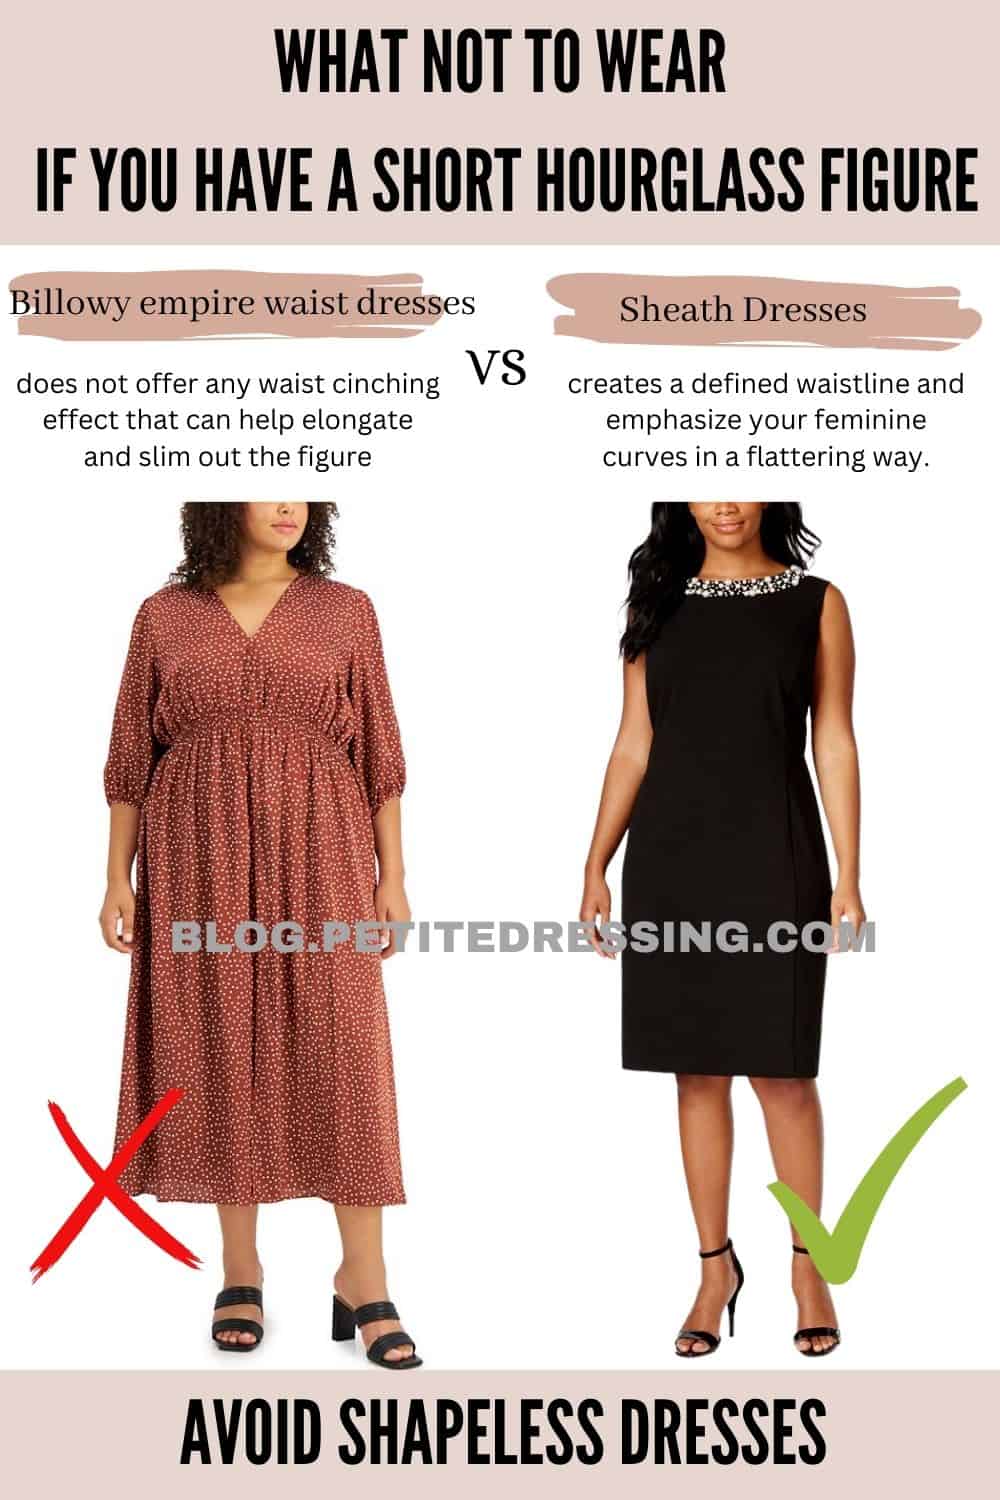 What not to wear if you have a short hourglass figure